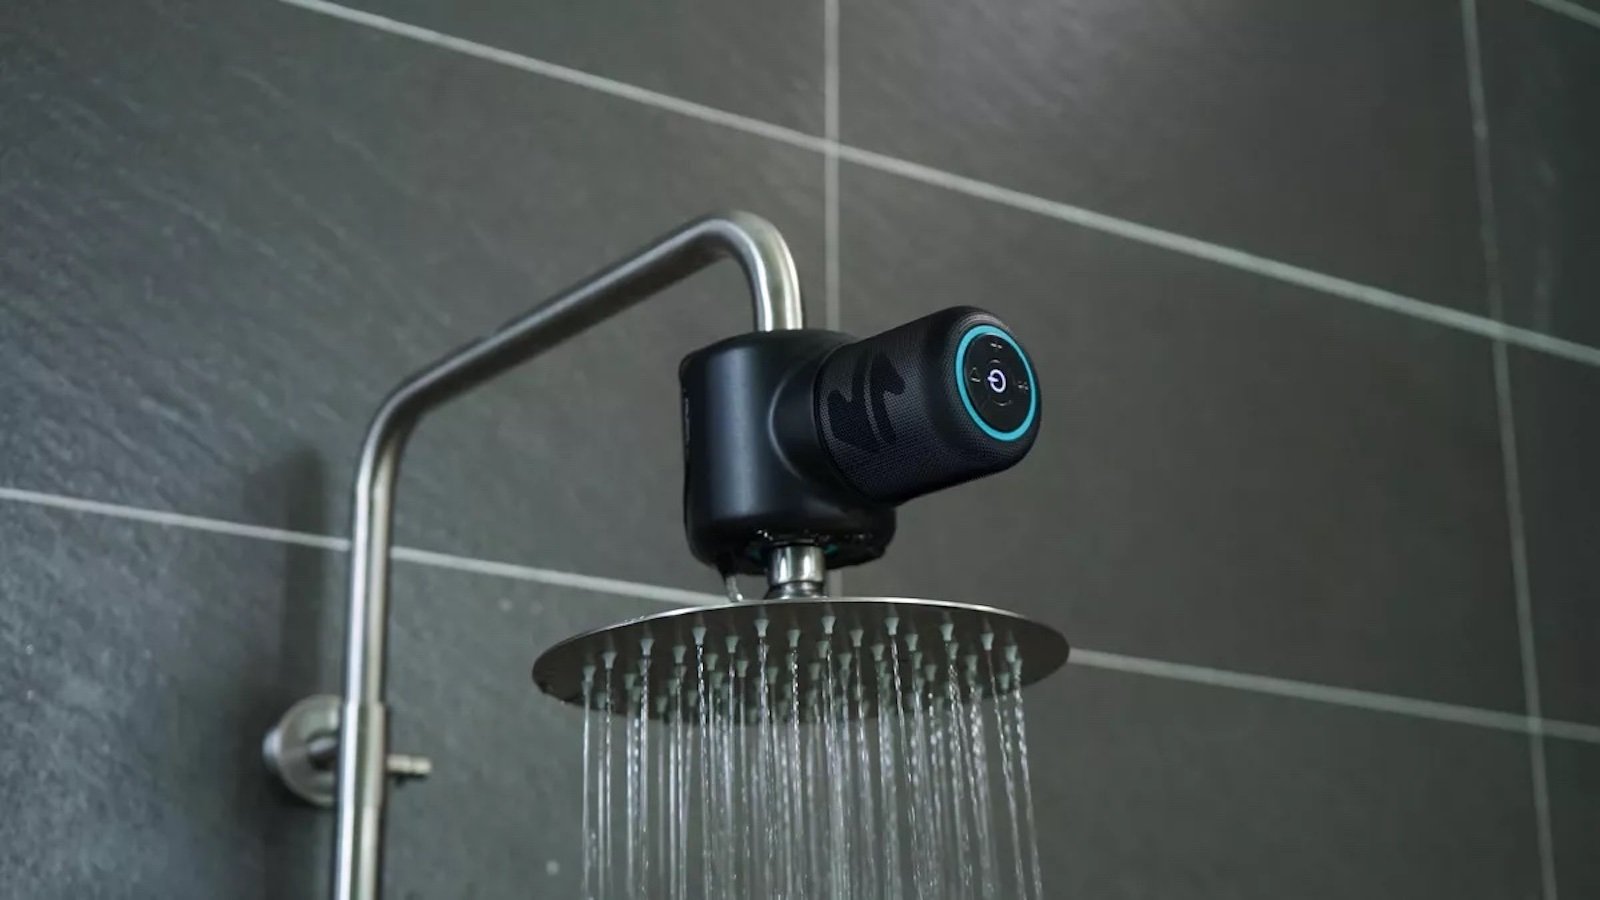 Ampere Shower Power Bluetooth speaker gets power from your running water